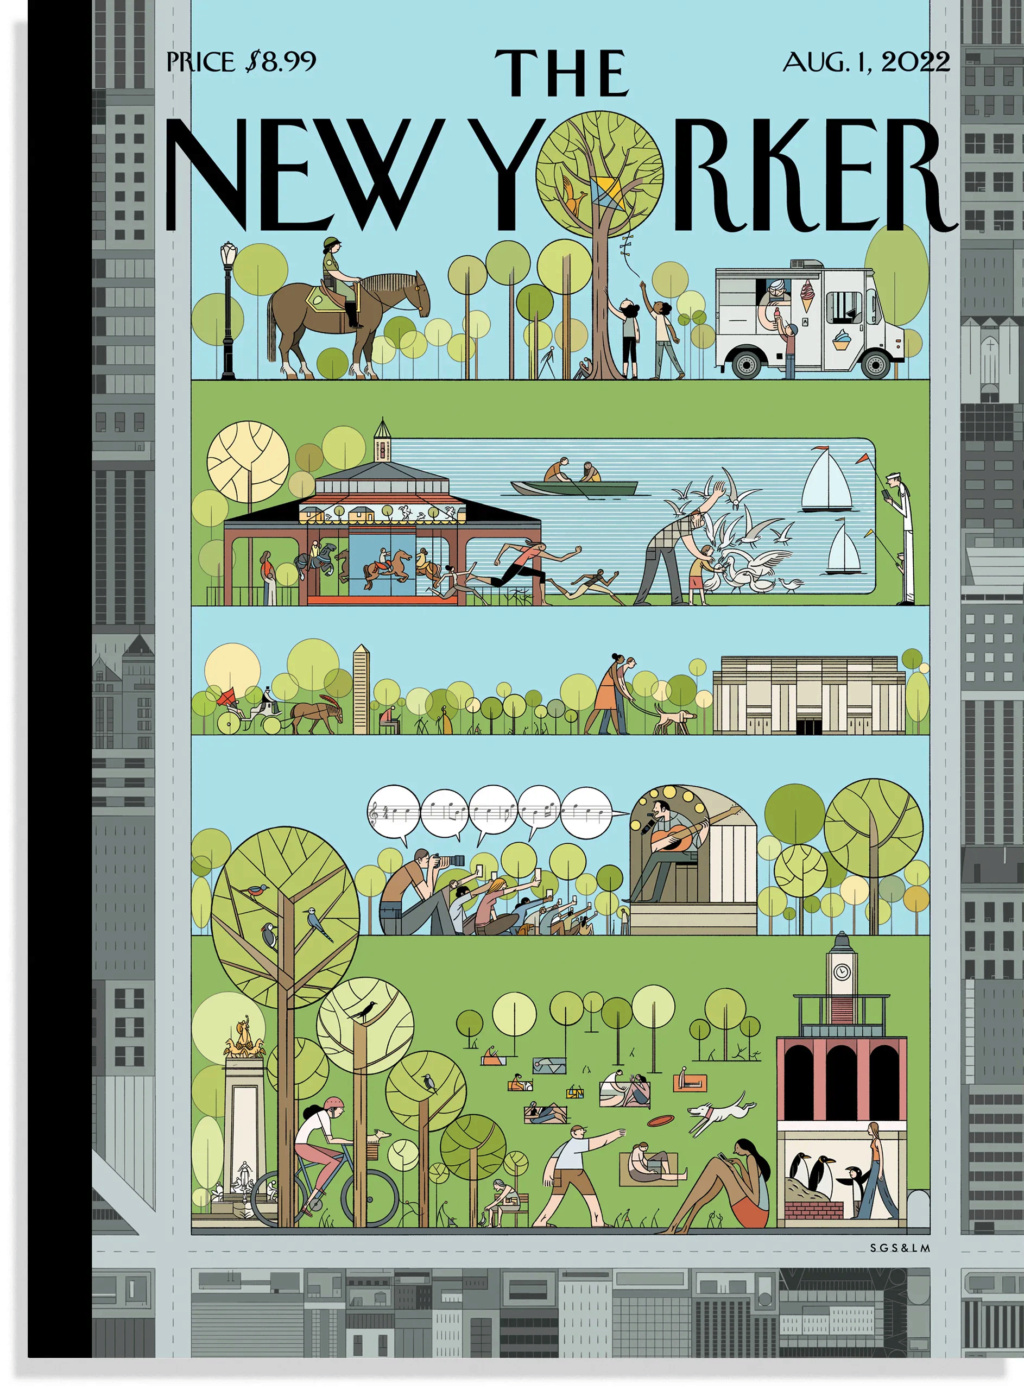 The New Yorker : Les couvertures - Page 3 Sergio10